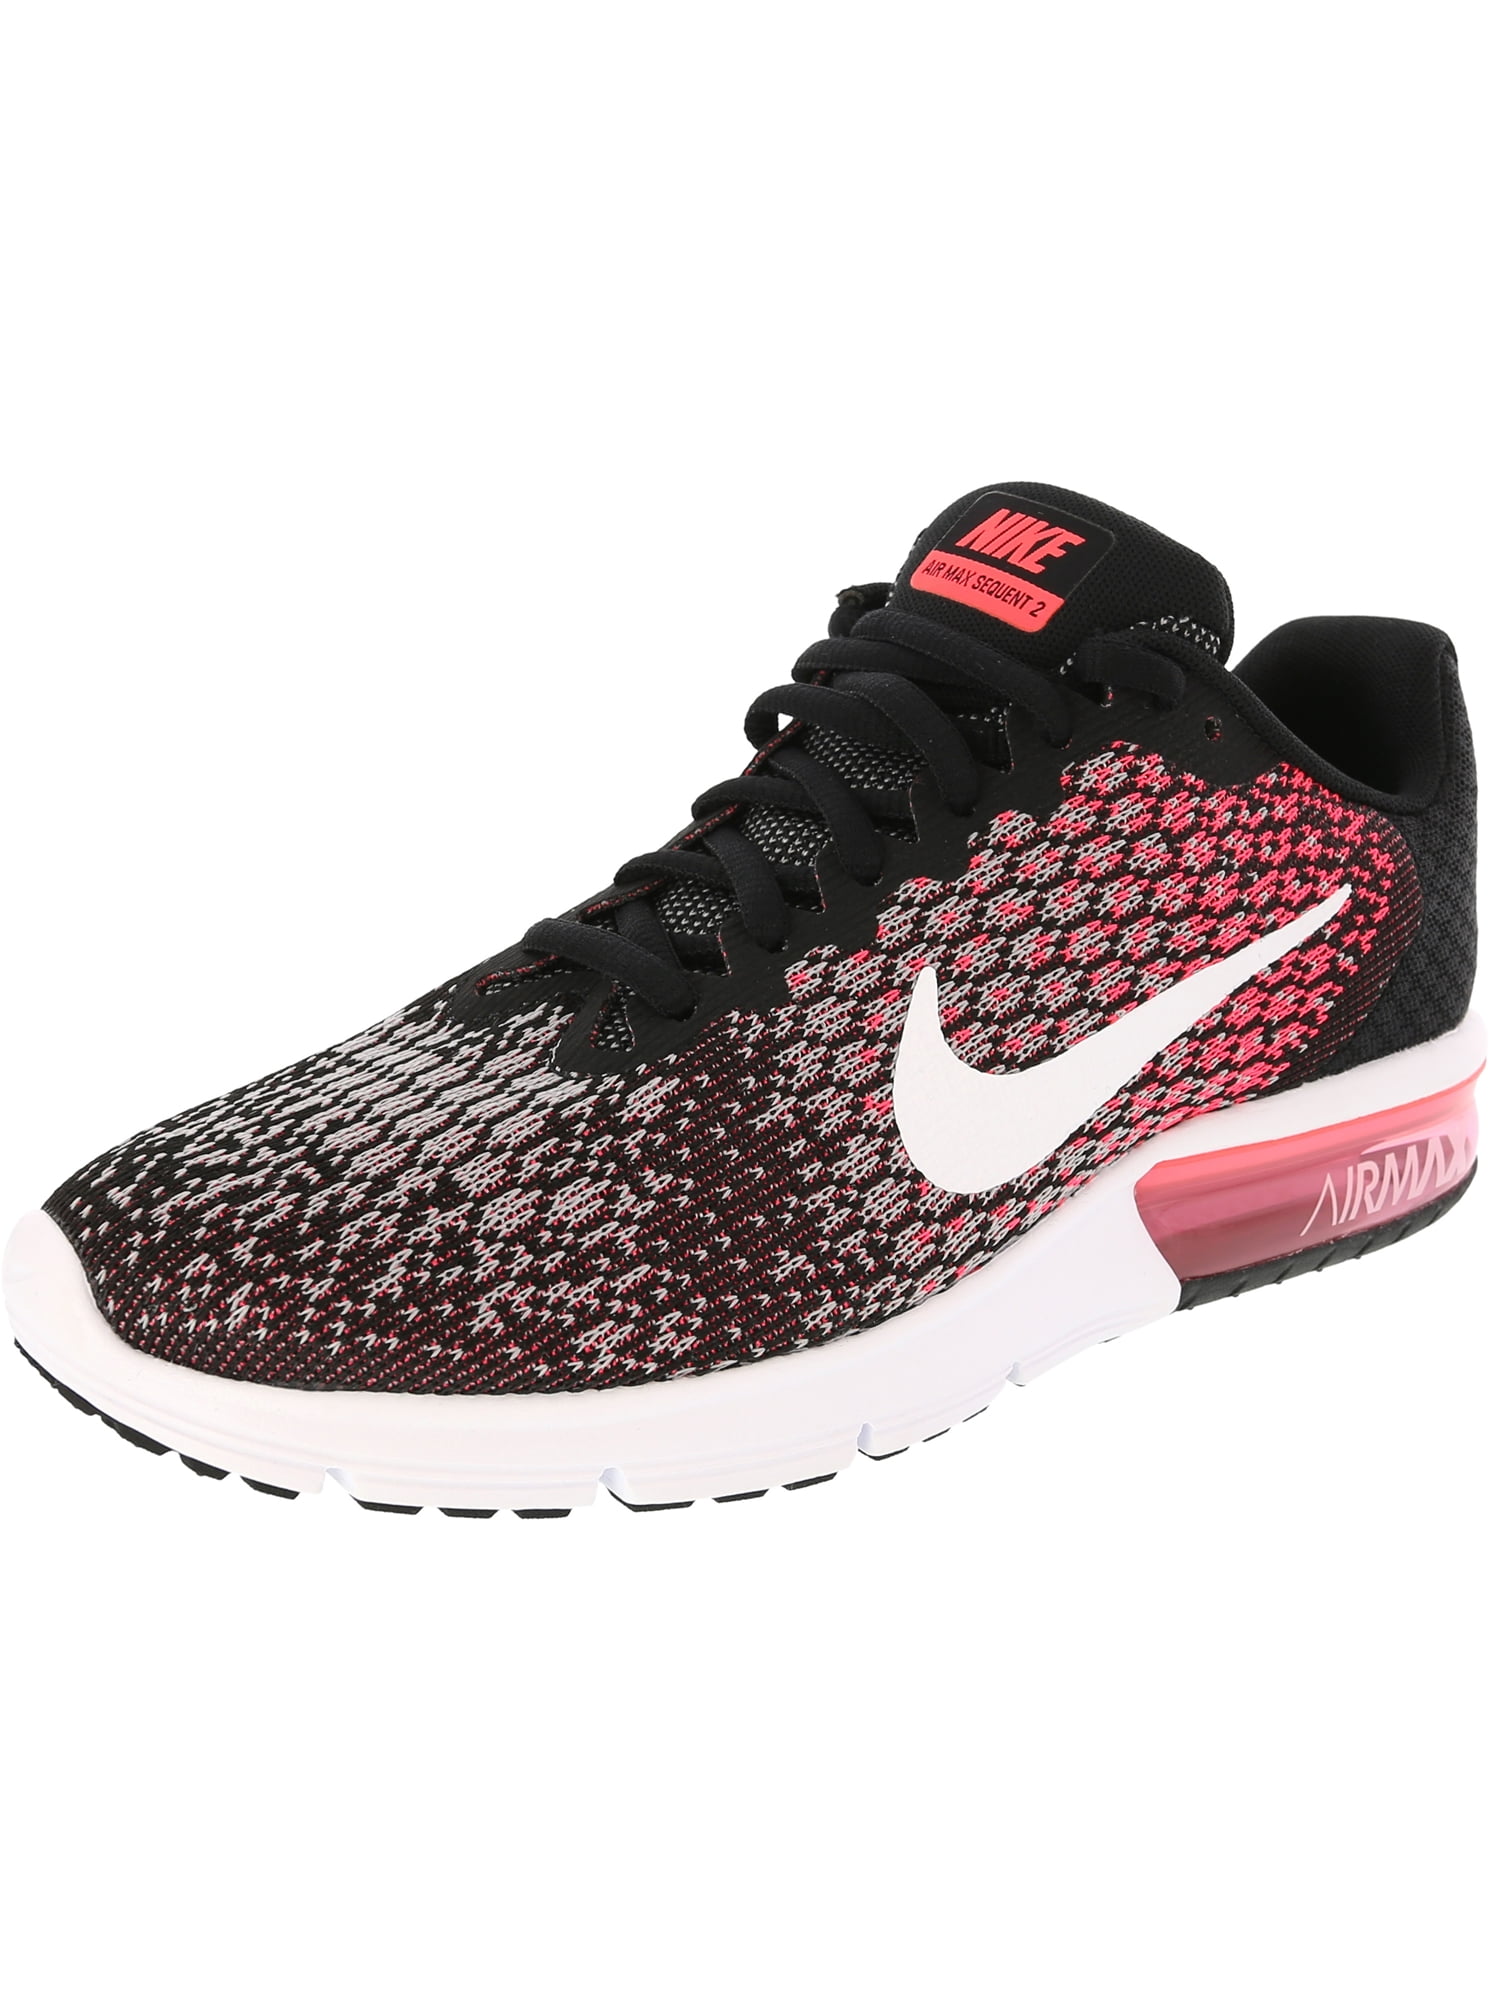 soep Modieus luister Nike Women's Air Max Sequent 2 Black / White - Racer Pink Ankle-High  Running Shoe 7.5M - Walmart.com